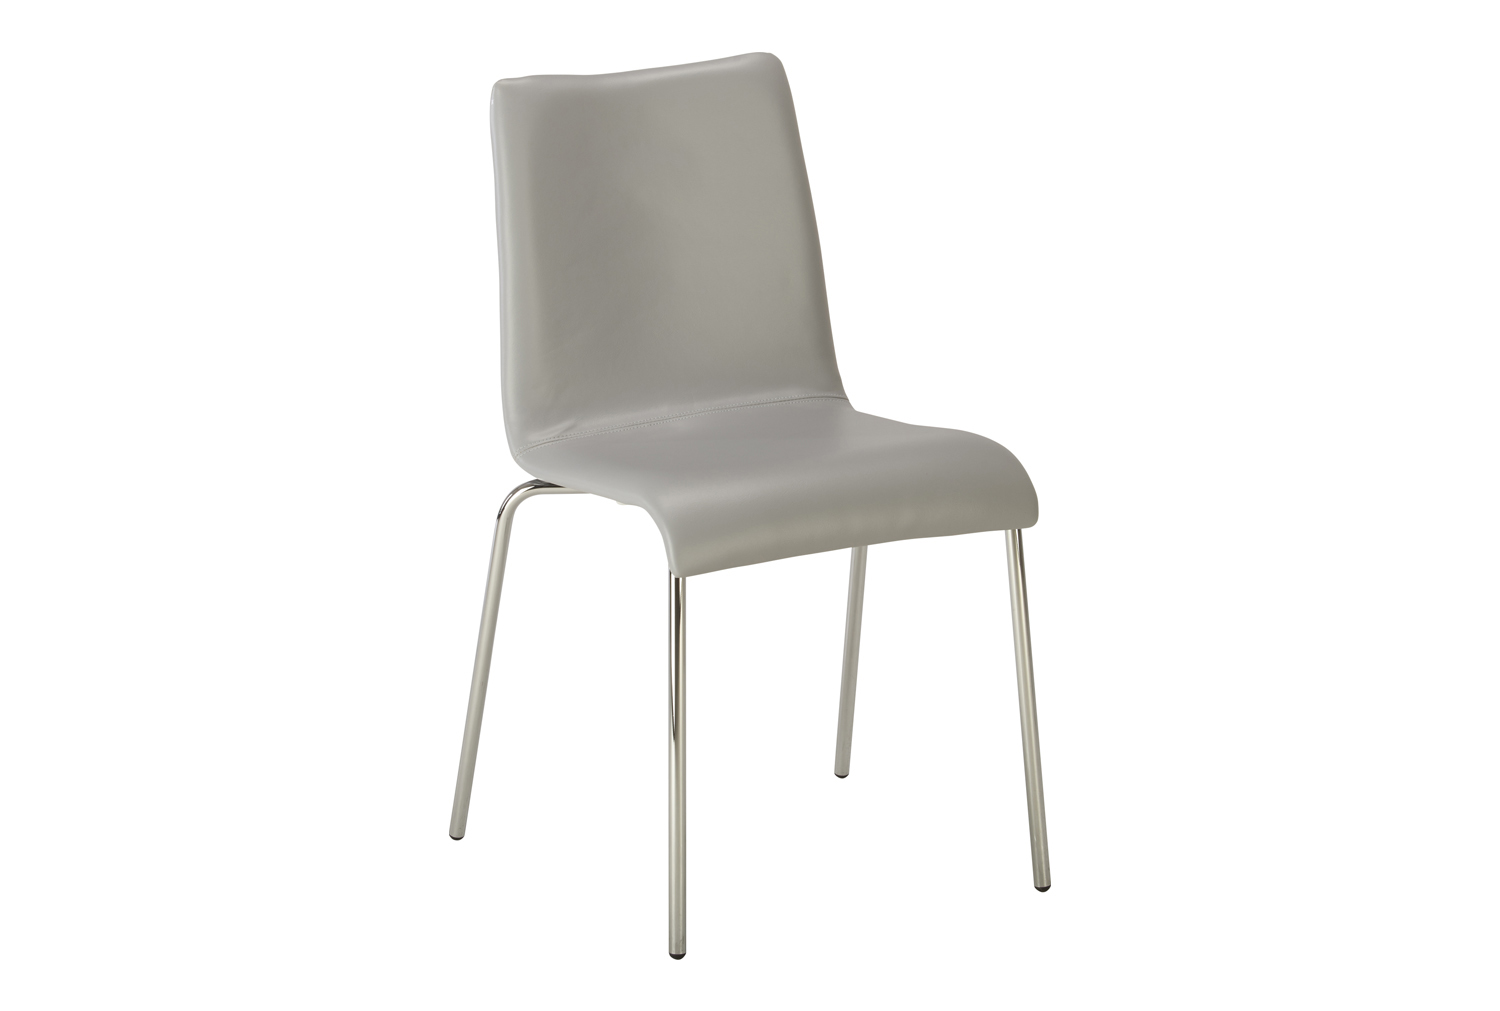 Qty 4 - Wilson Upholstered Stacking Dining Chair, Everlasting